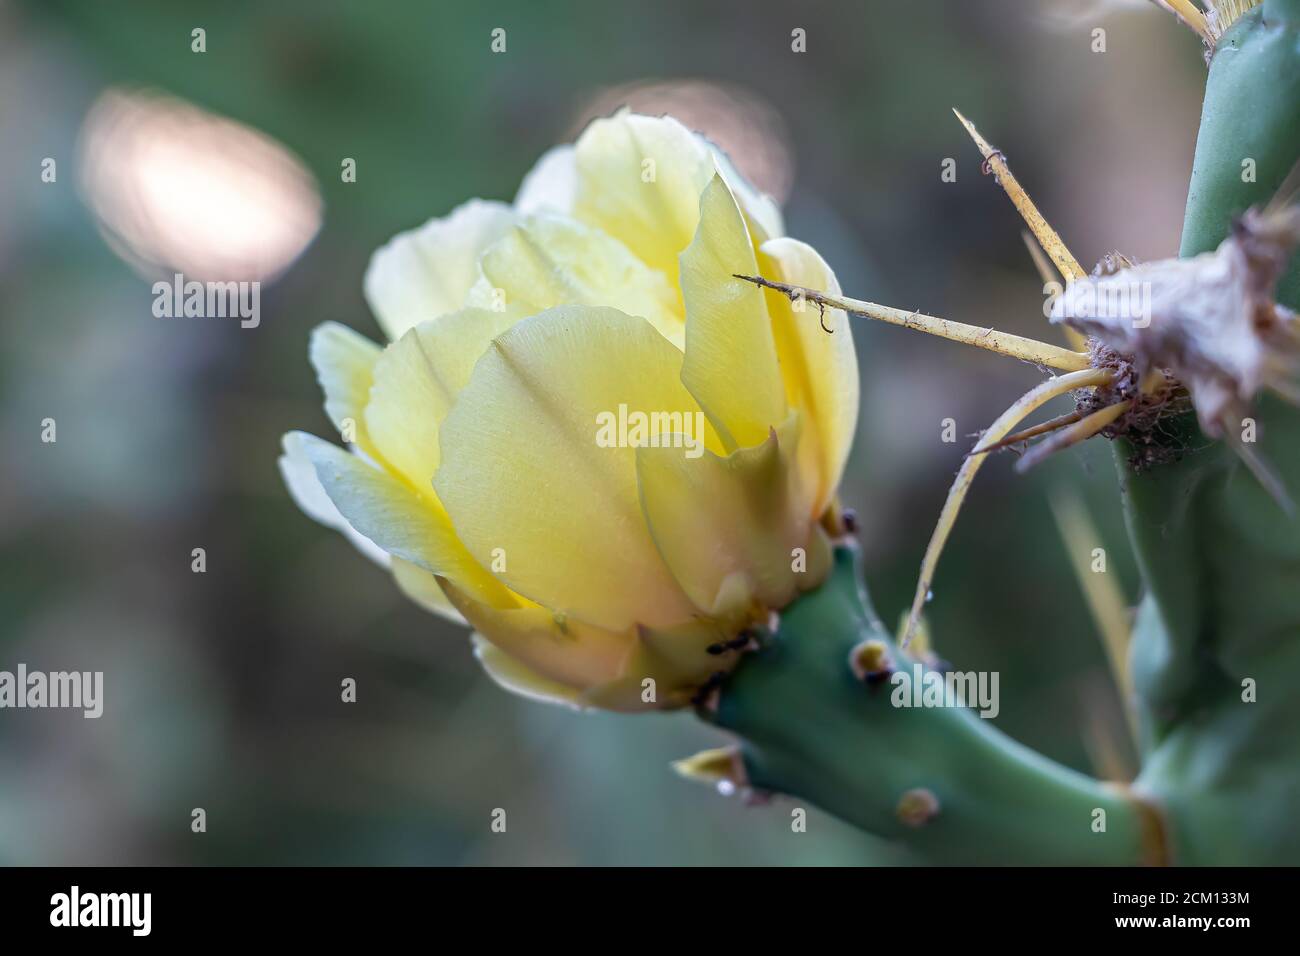 Macro photography of Prickly pear flower and spines in yellow color. Opuntia, commonly called prickly pear, is a genus in the cactus family, Cactaceae Stock Photo